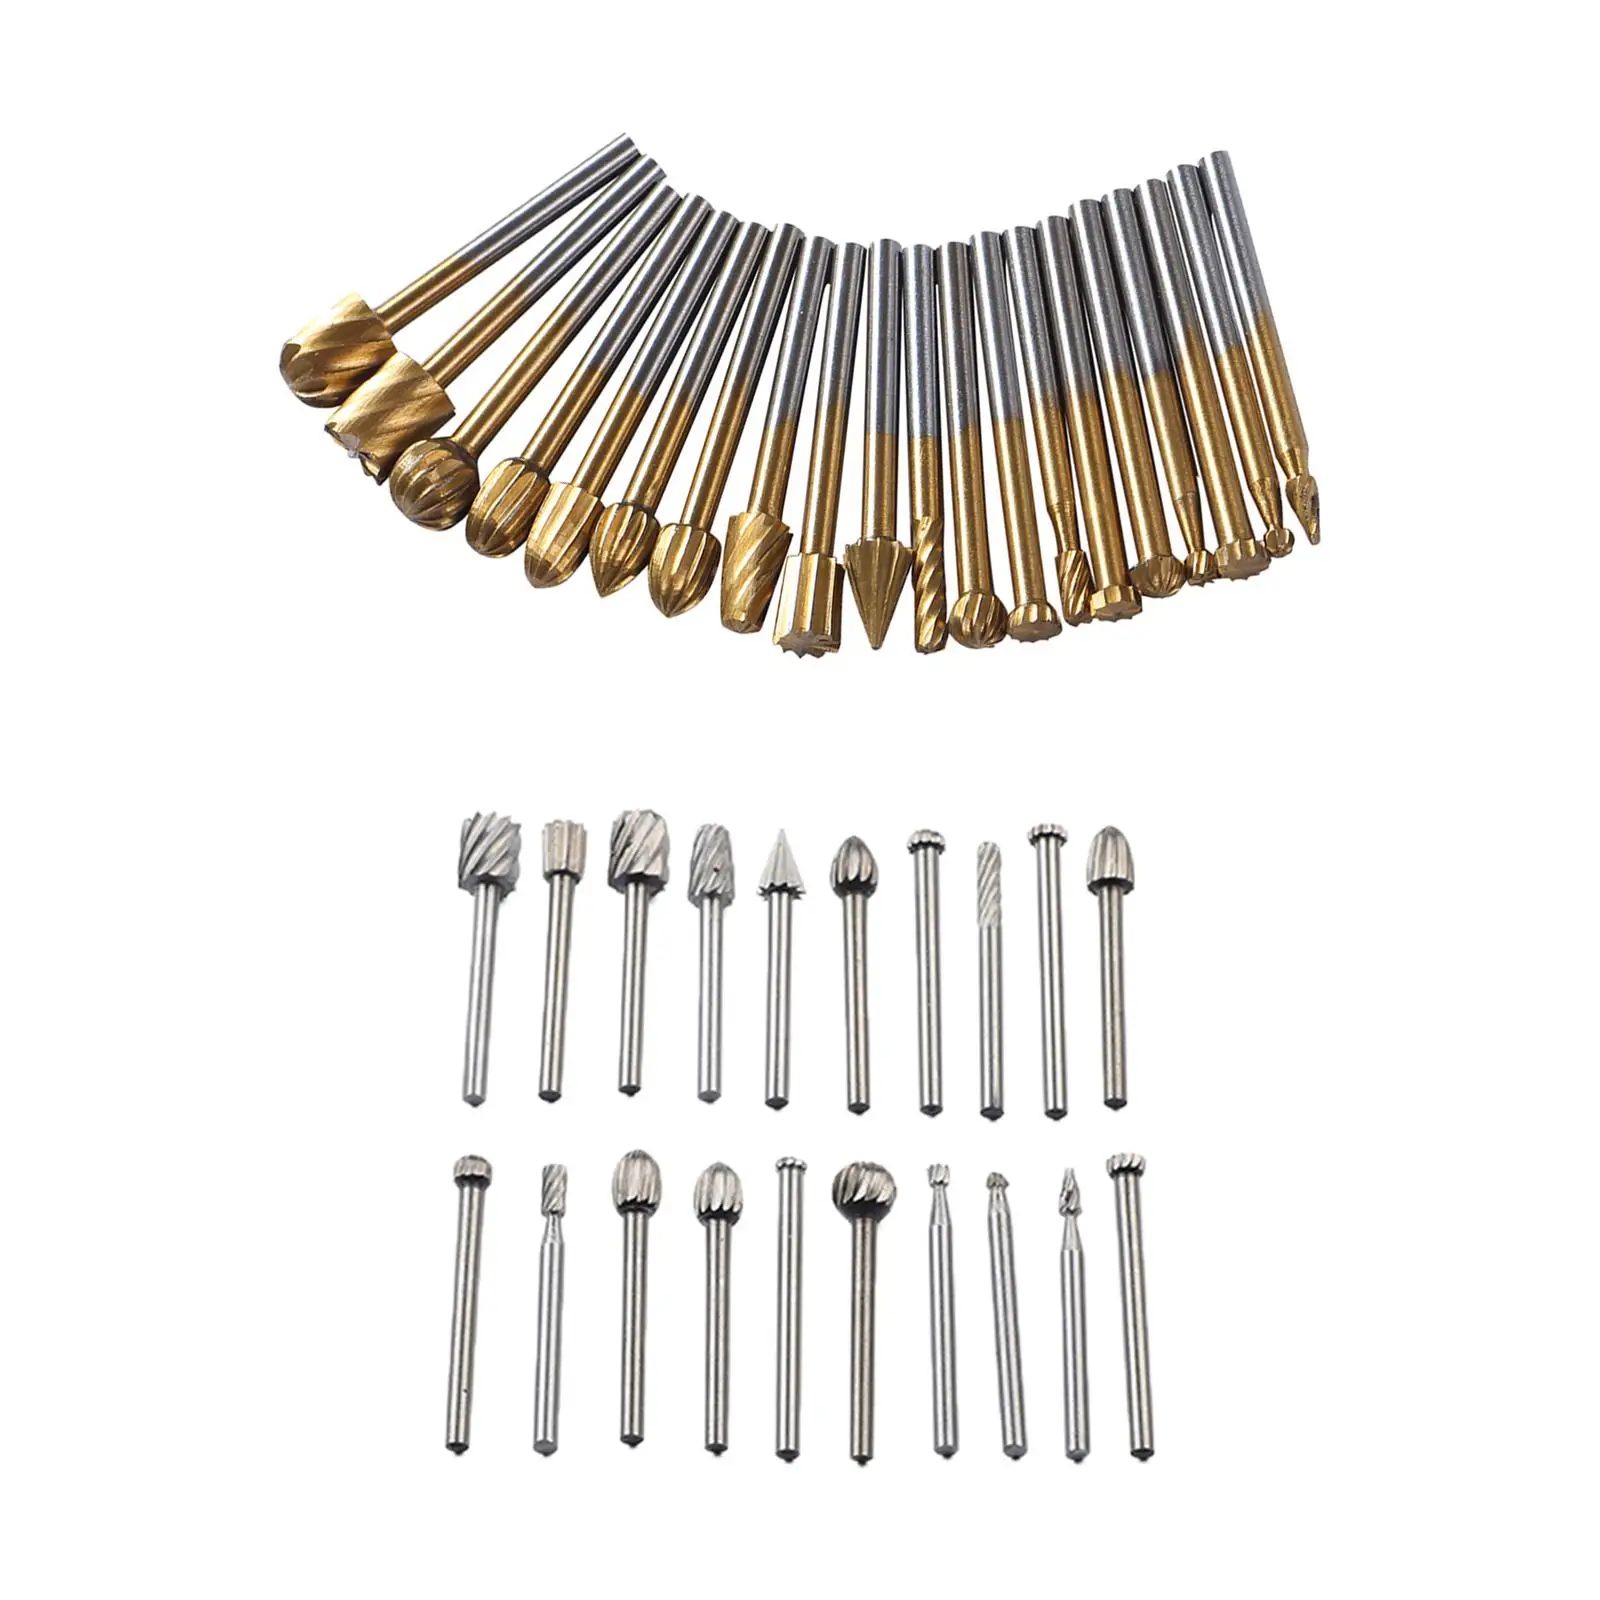 20Pcs Tungsten Steel Rotary Drill Set, 3.1mm shanks Engraving Bits Polishing Rotary Tools for Carving Drilling Jewelry Ceramics